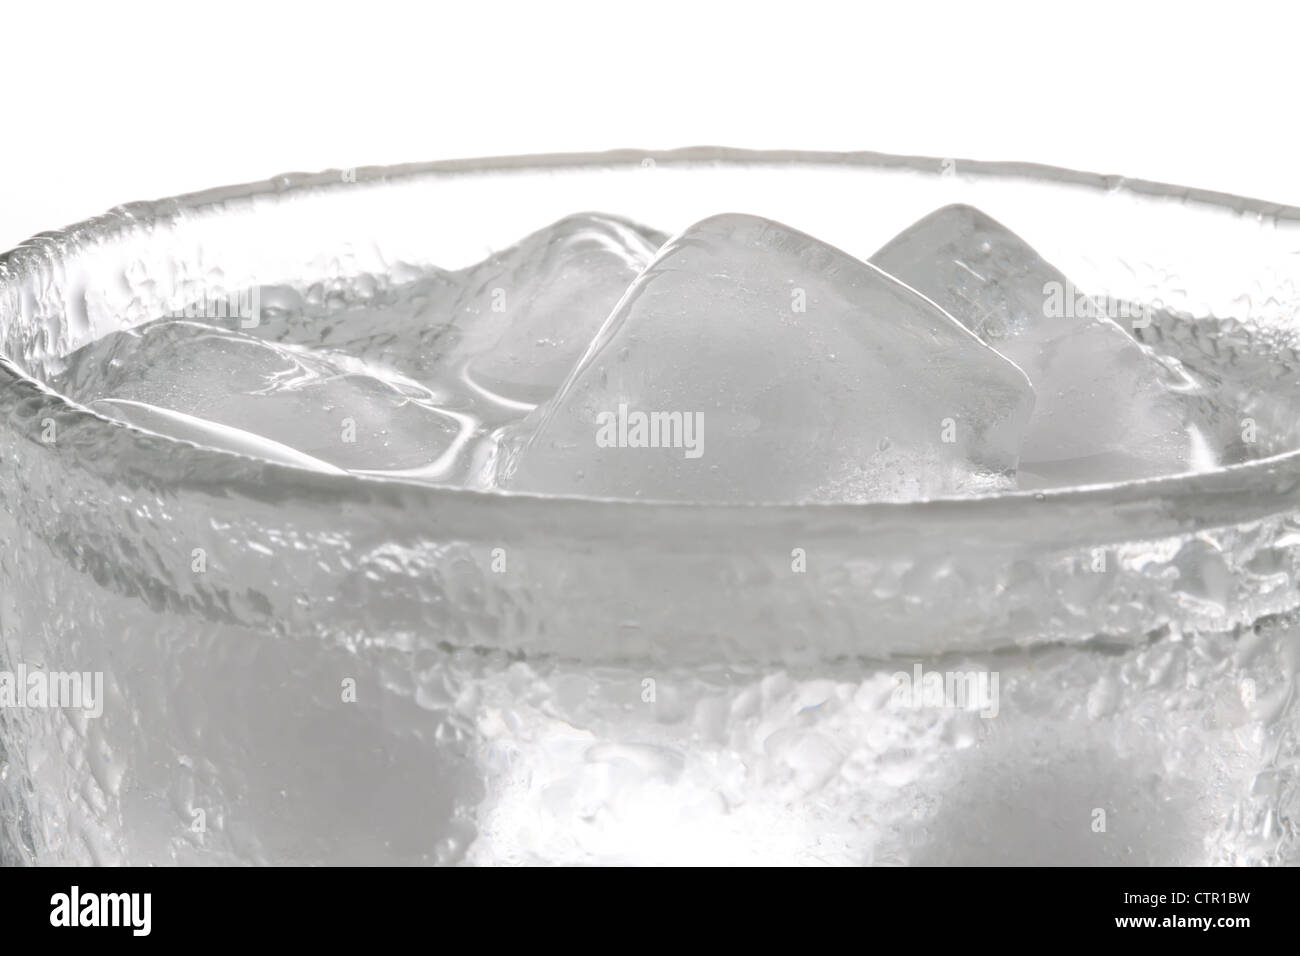 https://c8.alamy.com/comp/CTR1BW/glass-of-fresh-water-cooled-with-ice-cubes-CTR1BW.jpg